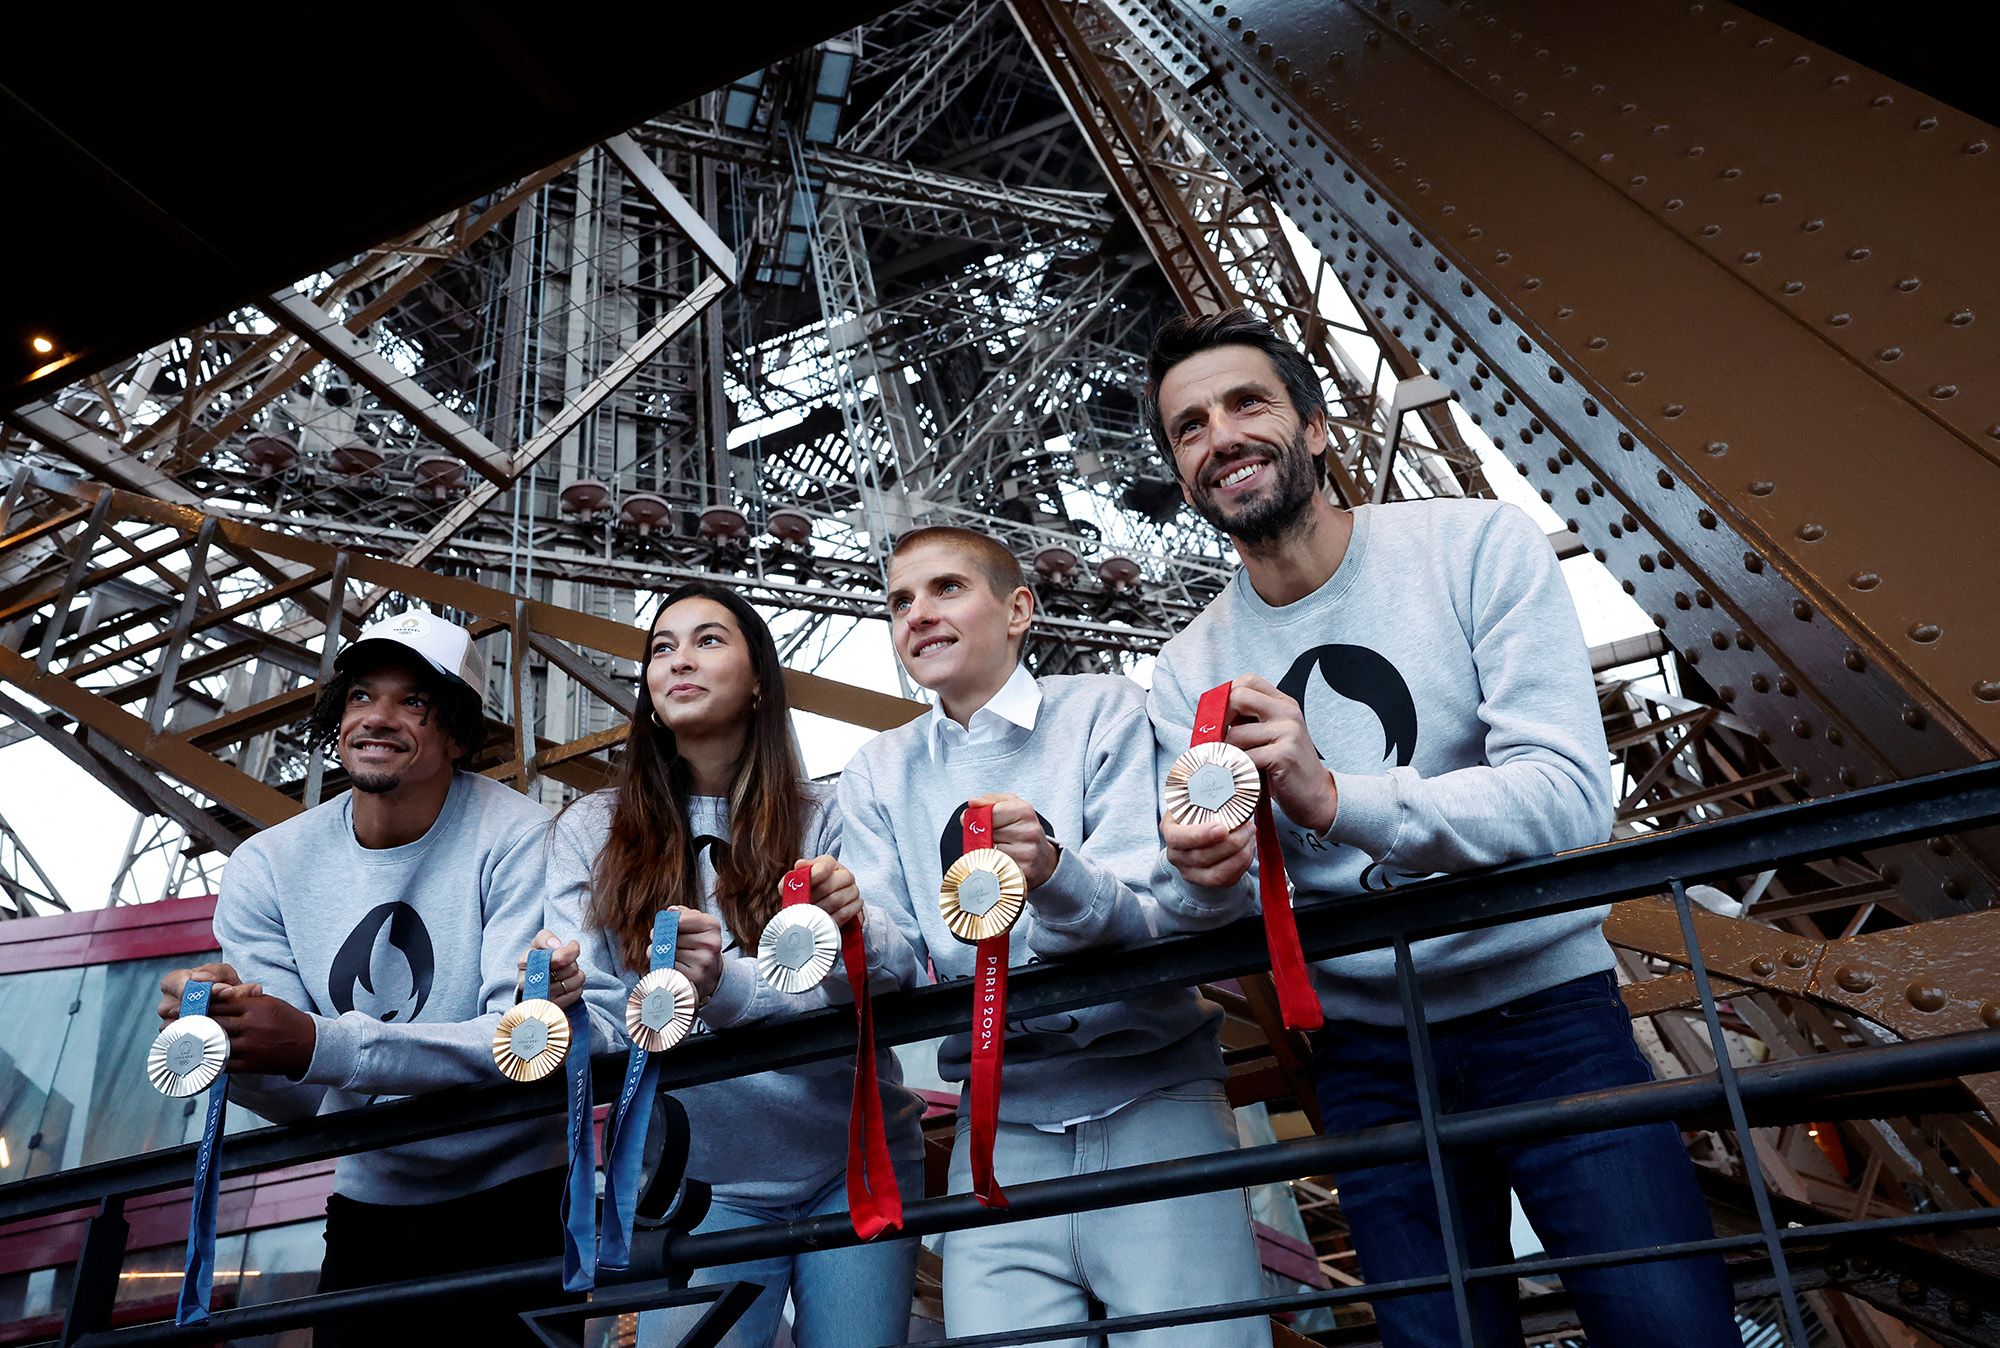 From right: Tony Estanguet, president of the Paris 2024 Olympics organising committee on the Eiffel Tower with French cyclist Marie Patouillet, fencer Sara Balzer and athlete Arnaud Assoumani holding Olympic and Paralympic Games medals.